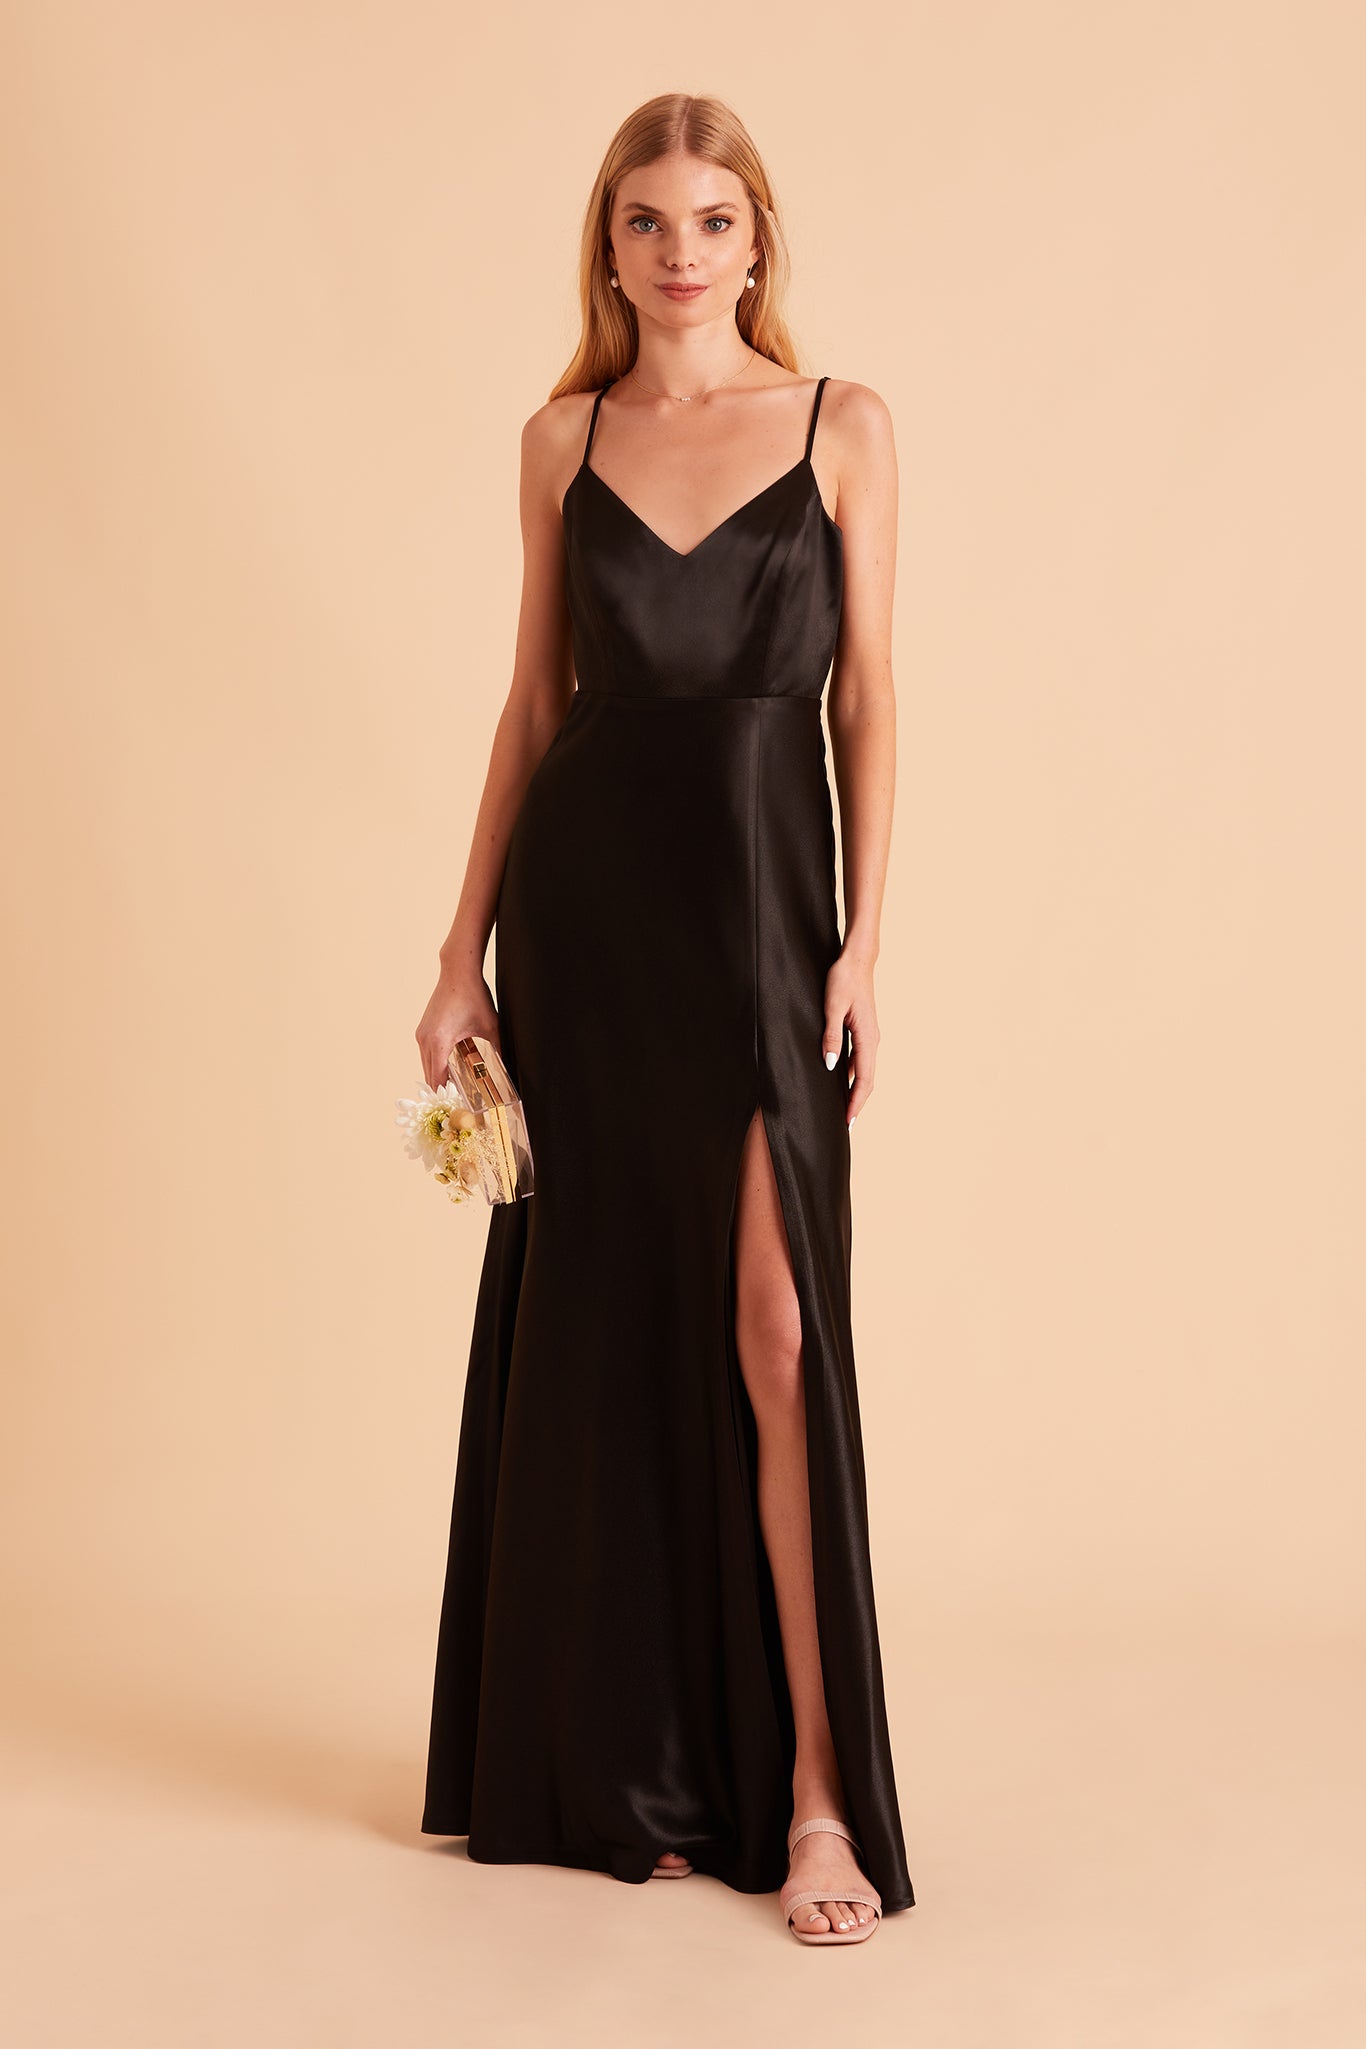 Jay bridesmaid dress with slit in black satin by Birdy Grey, front view